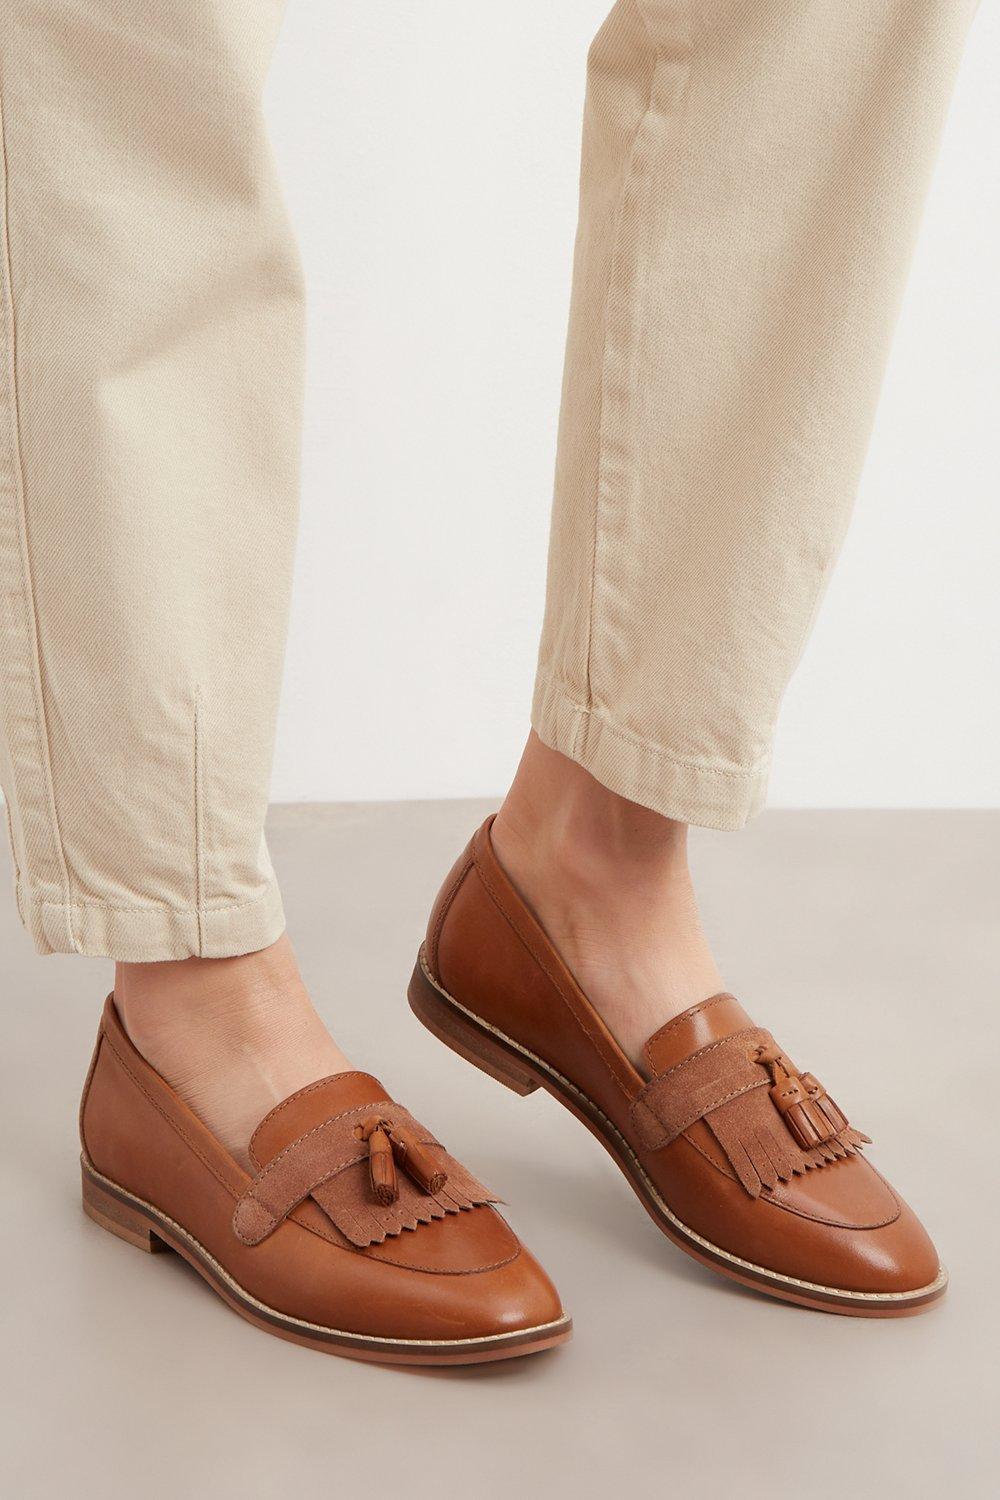 Women’s Principles: Colette Leather Fringed Loafers - tan - 6